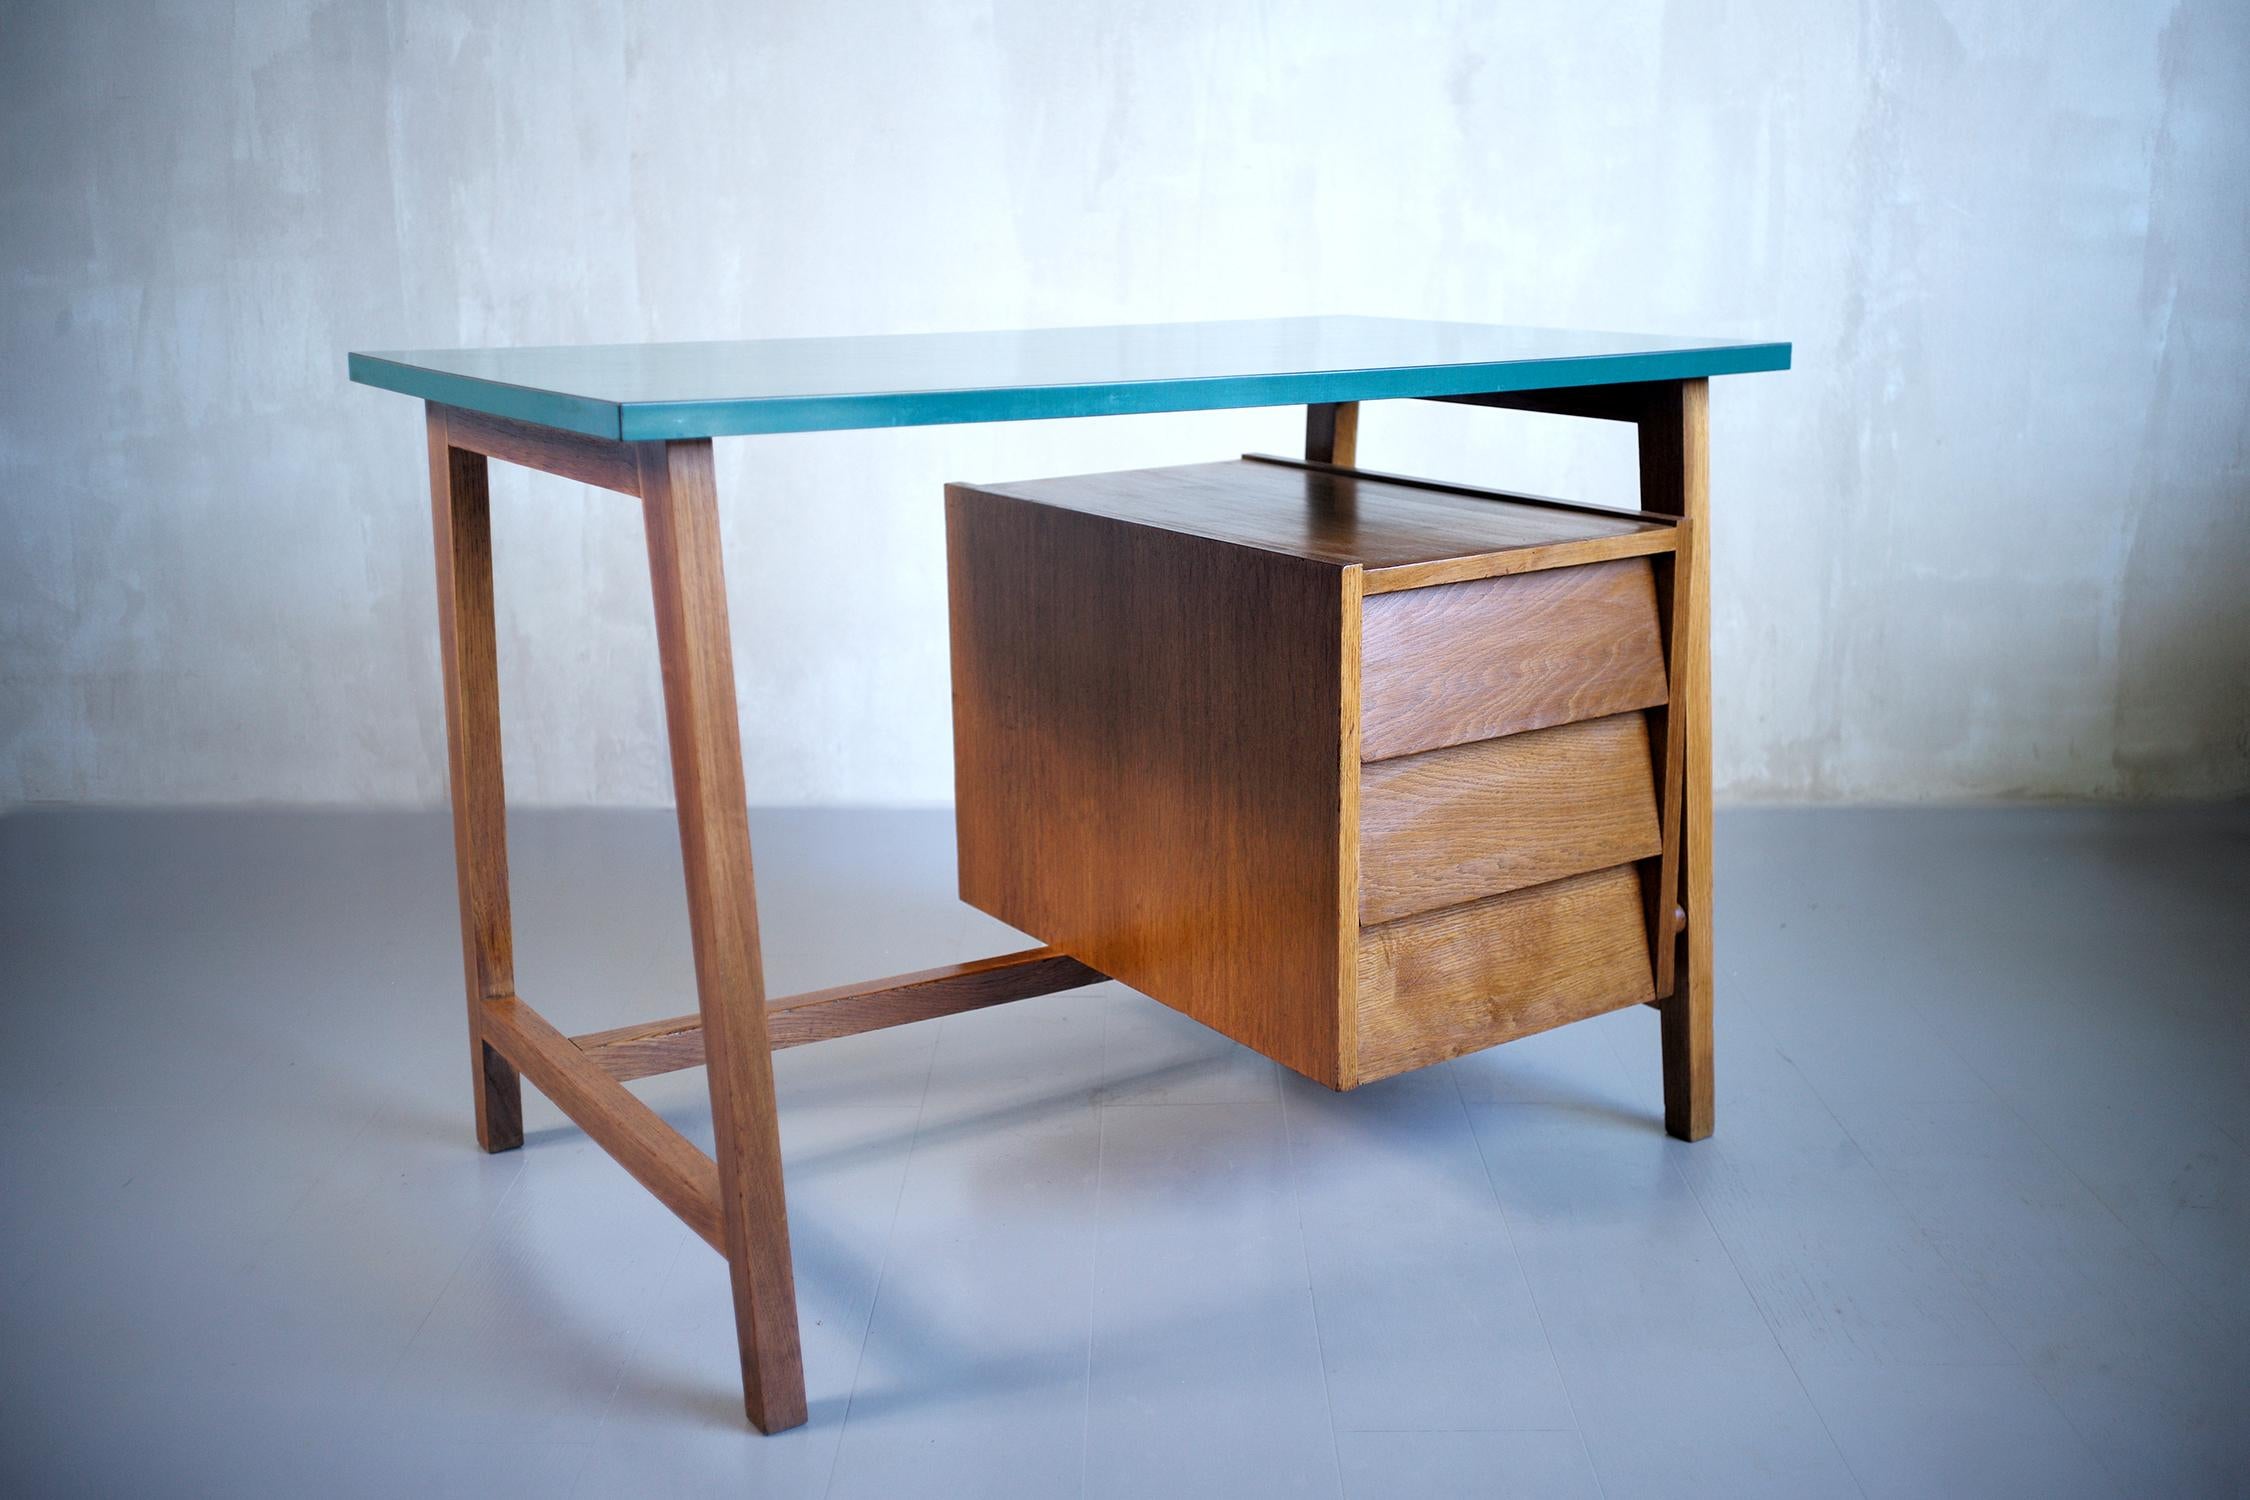 Desk attributed to Alain Richard, French Reconstruction 1950. The top is veneered with green Formica, the base and the fronts of the drawers are in solid oak, the structure of the box is in oak veneered slatted plywood. The box with three large